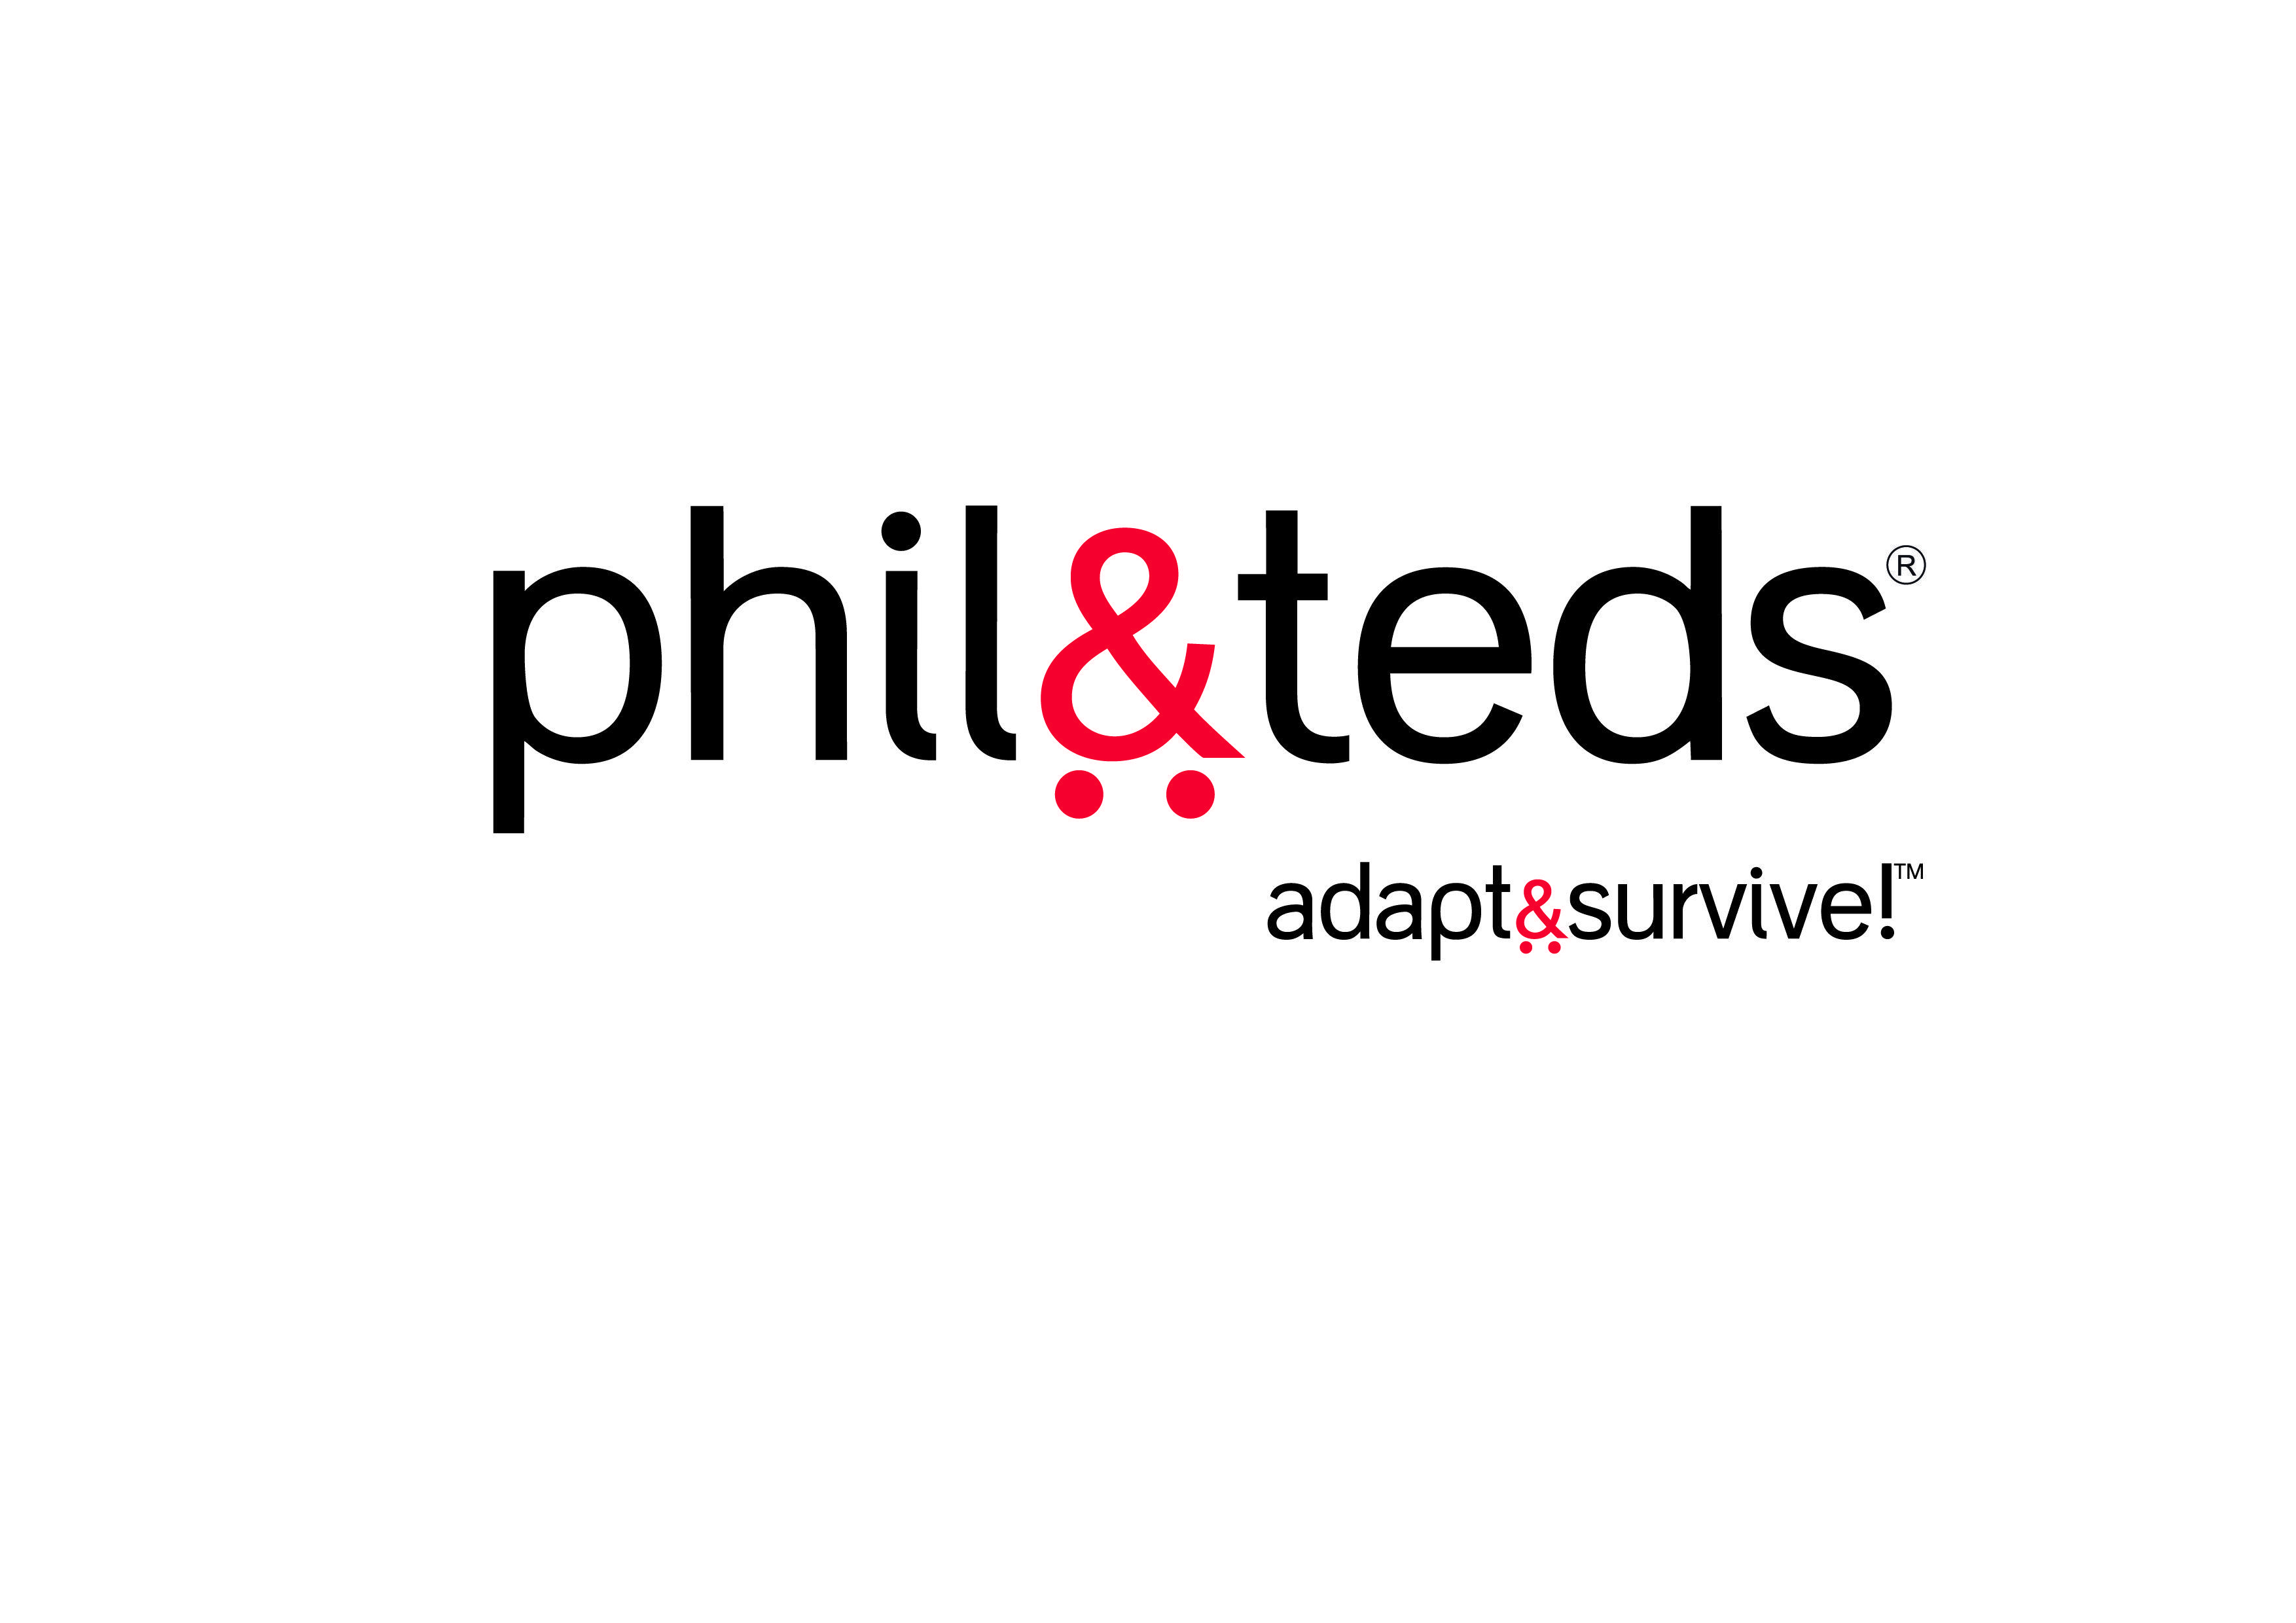 Phil Logo - phil and teds complete logo for PRINT copy - Little London